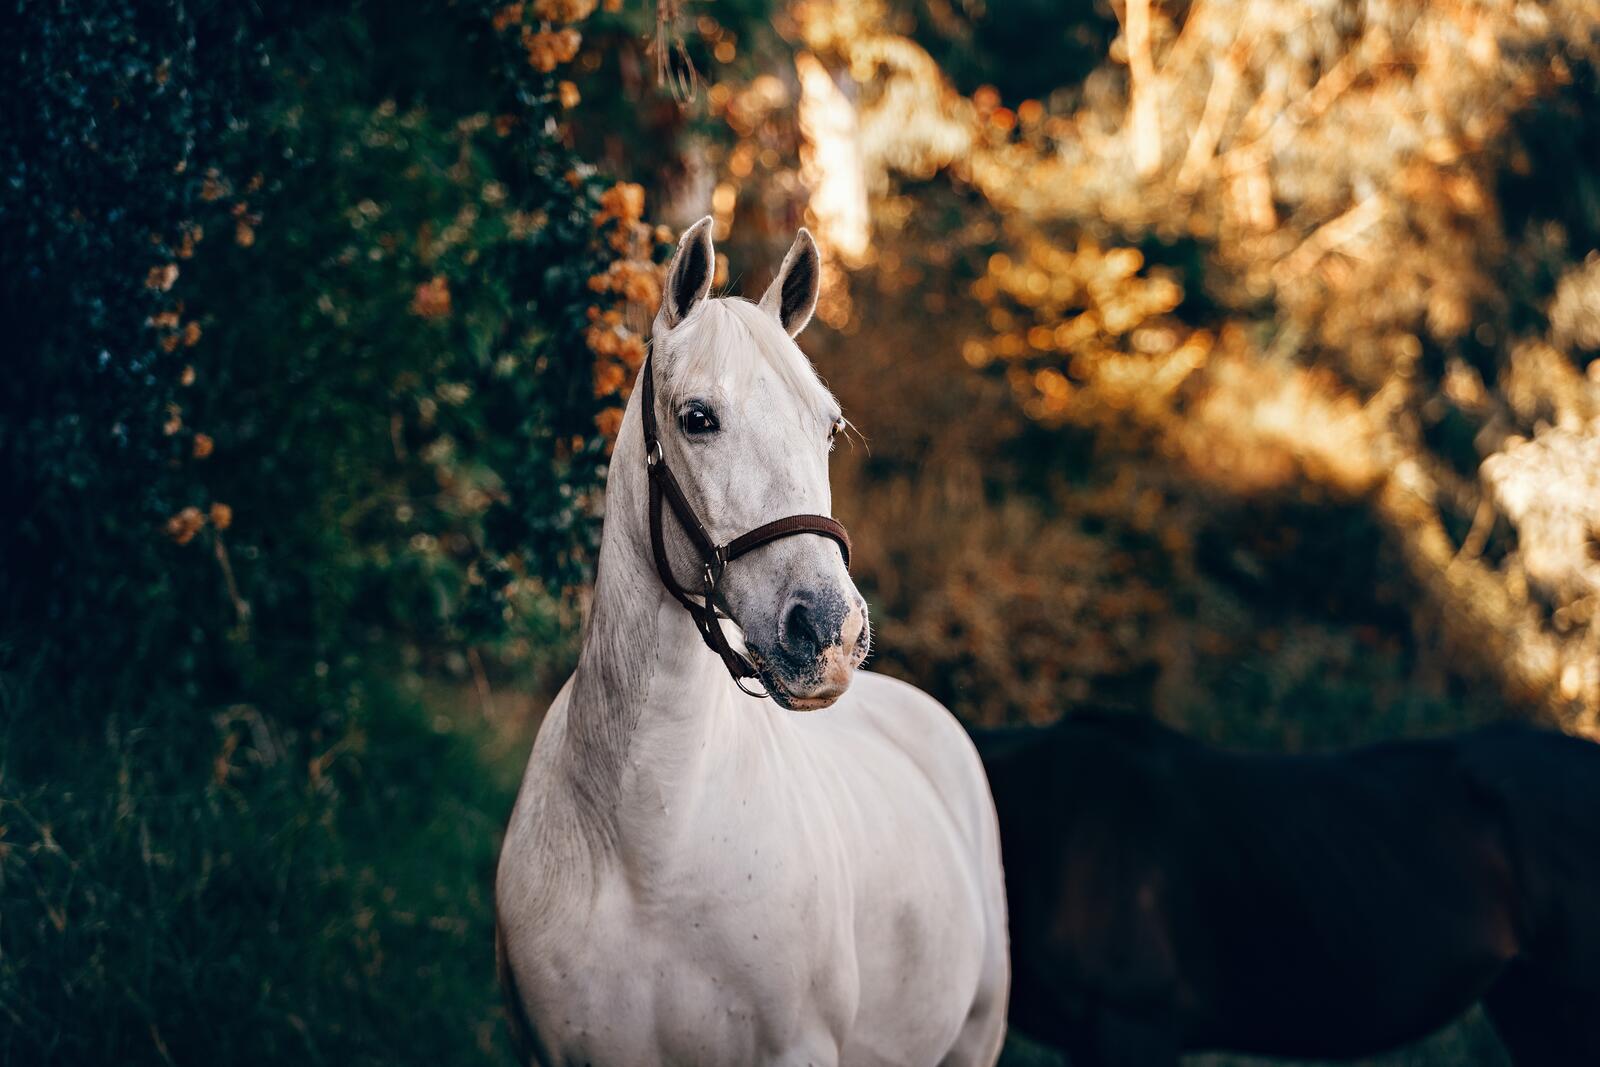 Free photo A beautiful white horse in a harness